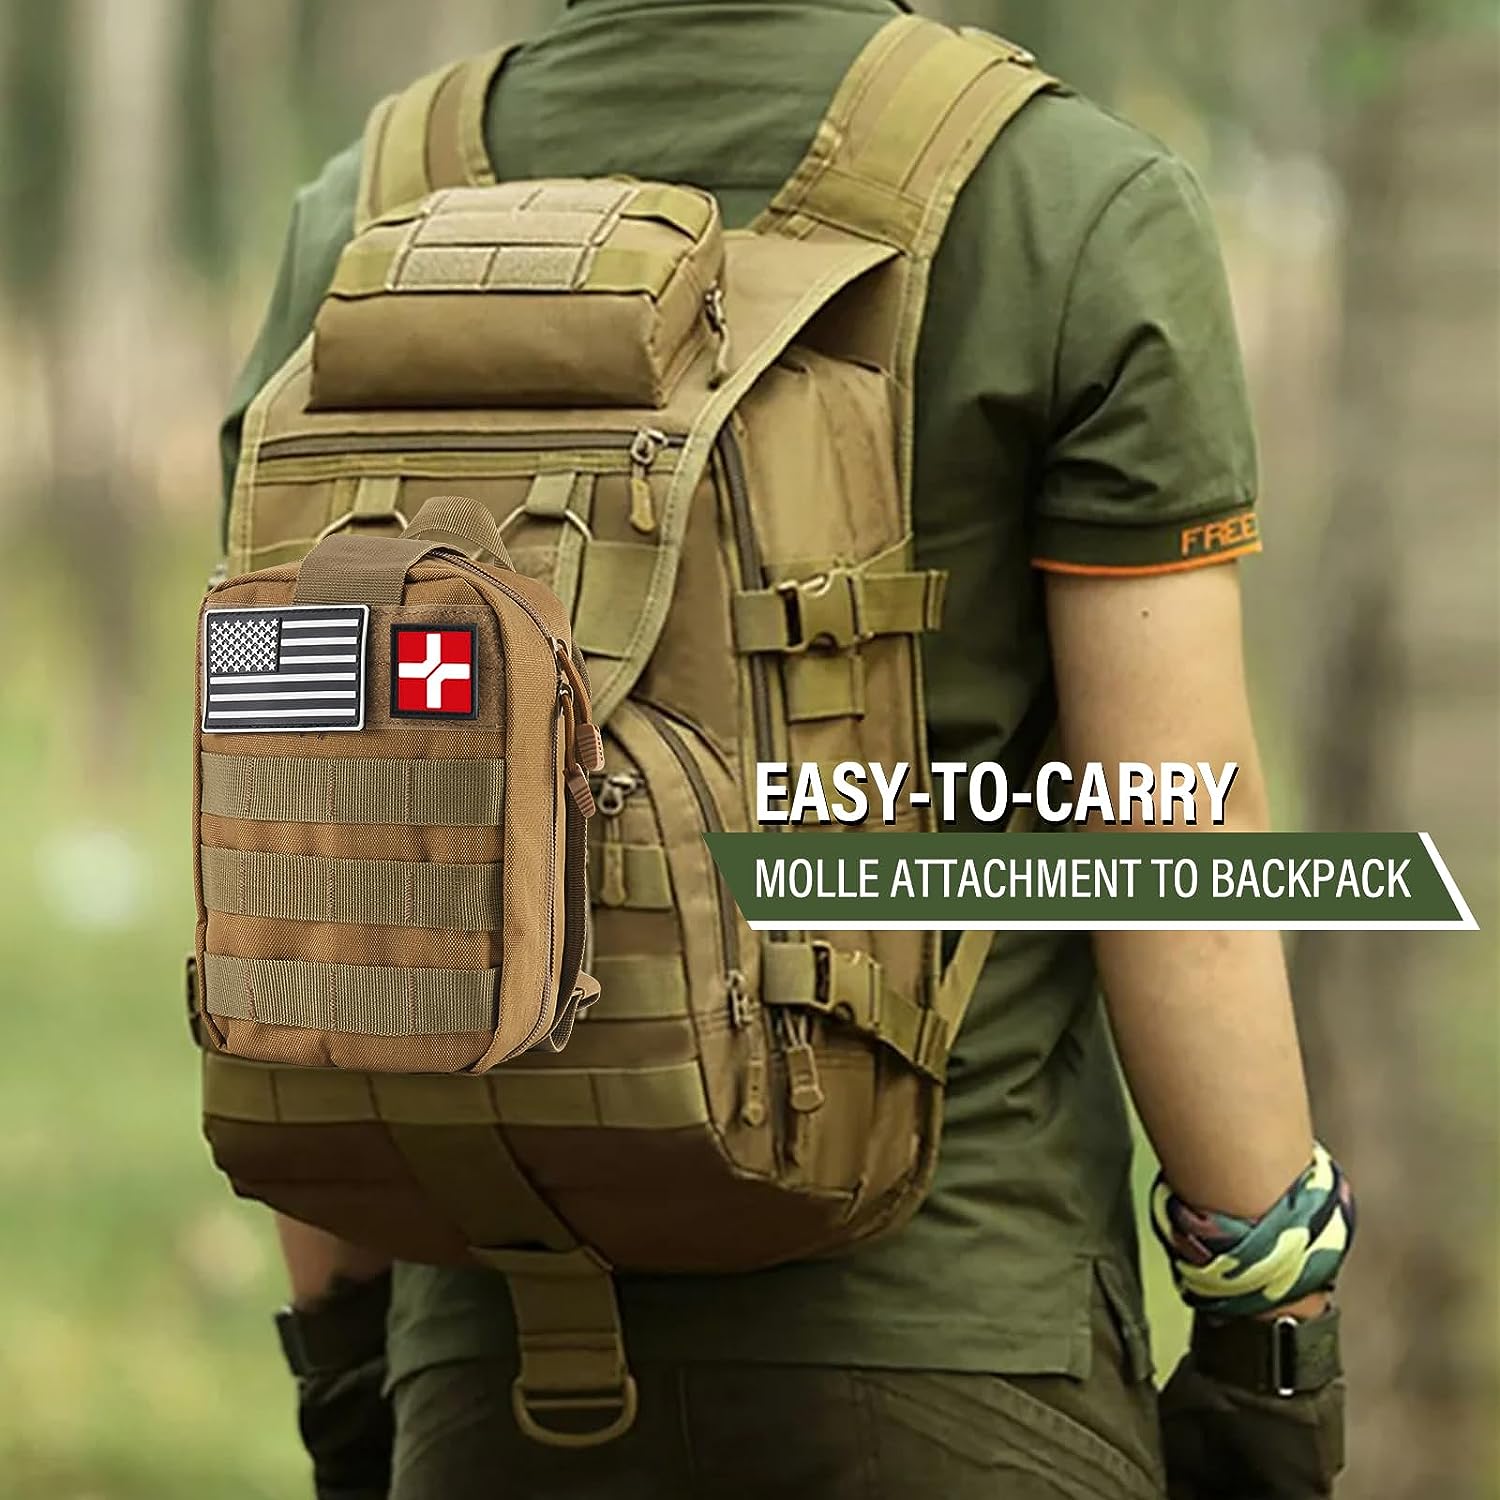 Survival First Aid Kit, Molle Medical Pouch 282PCS Outdoor Emergency Survival Gear and Equipment for Hiking Camping Hunting Car Boat Home Travel and Adventures, for Him Men